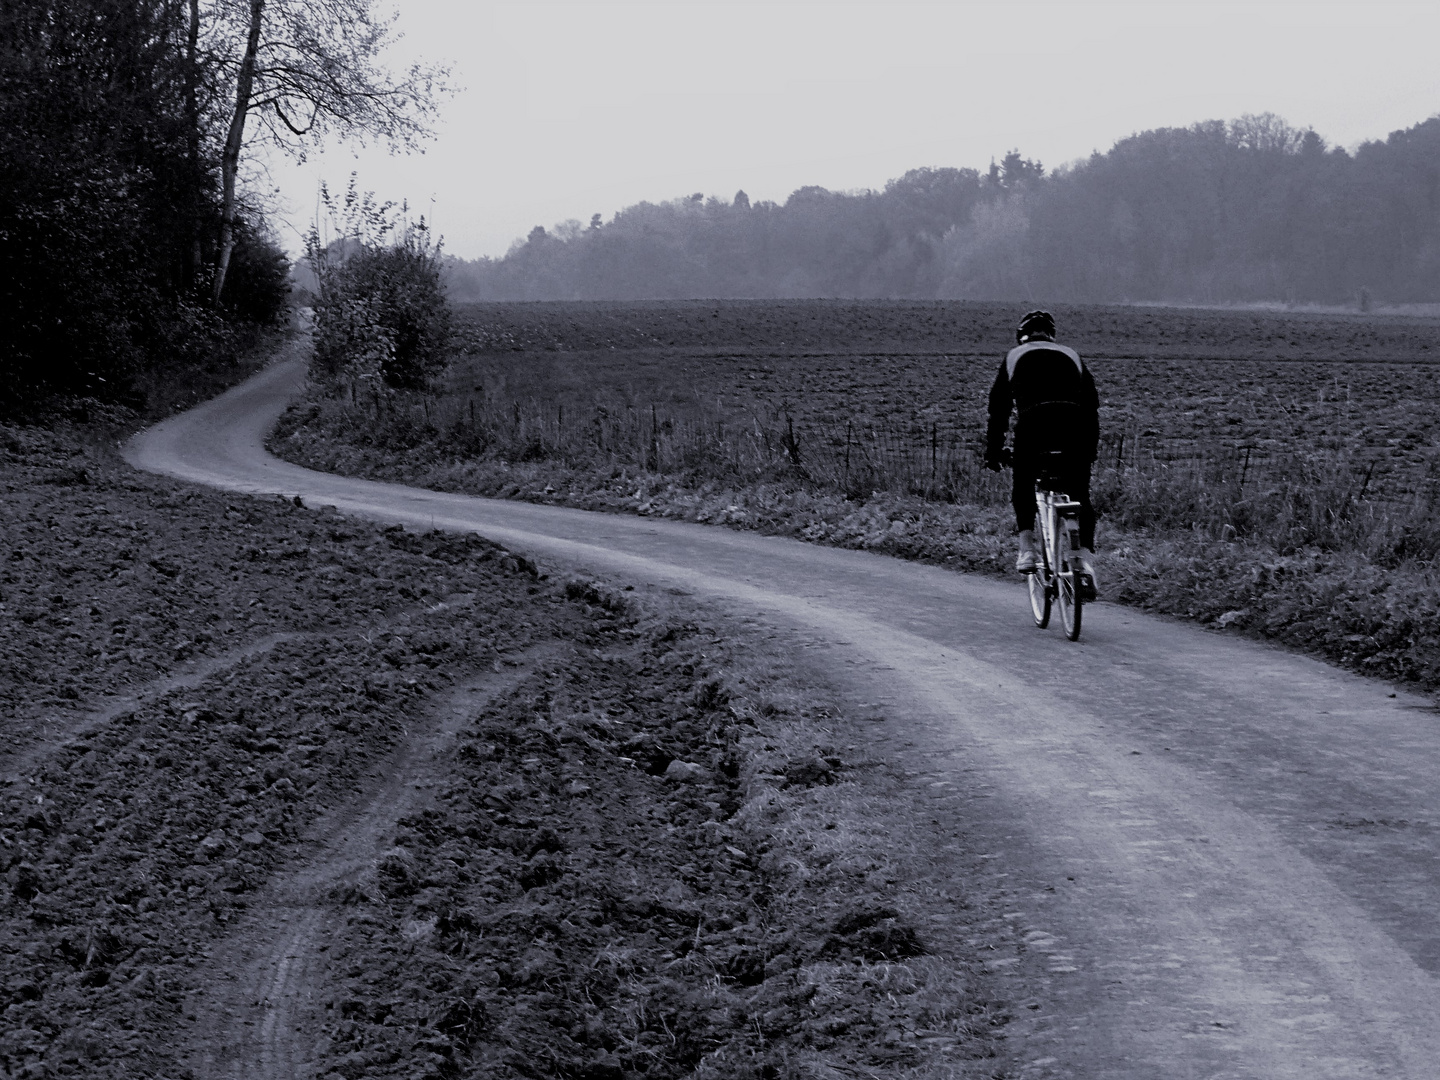 The lone cyclist